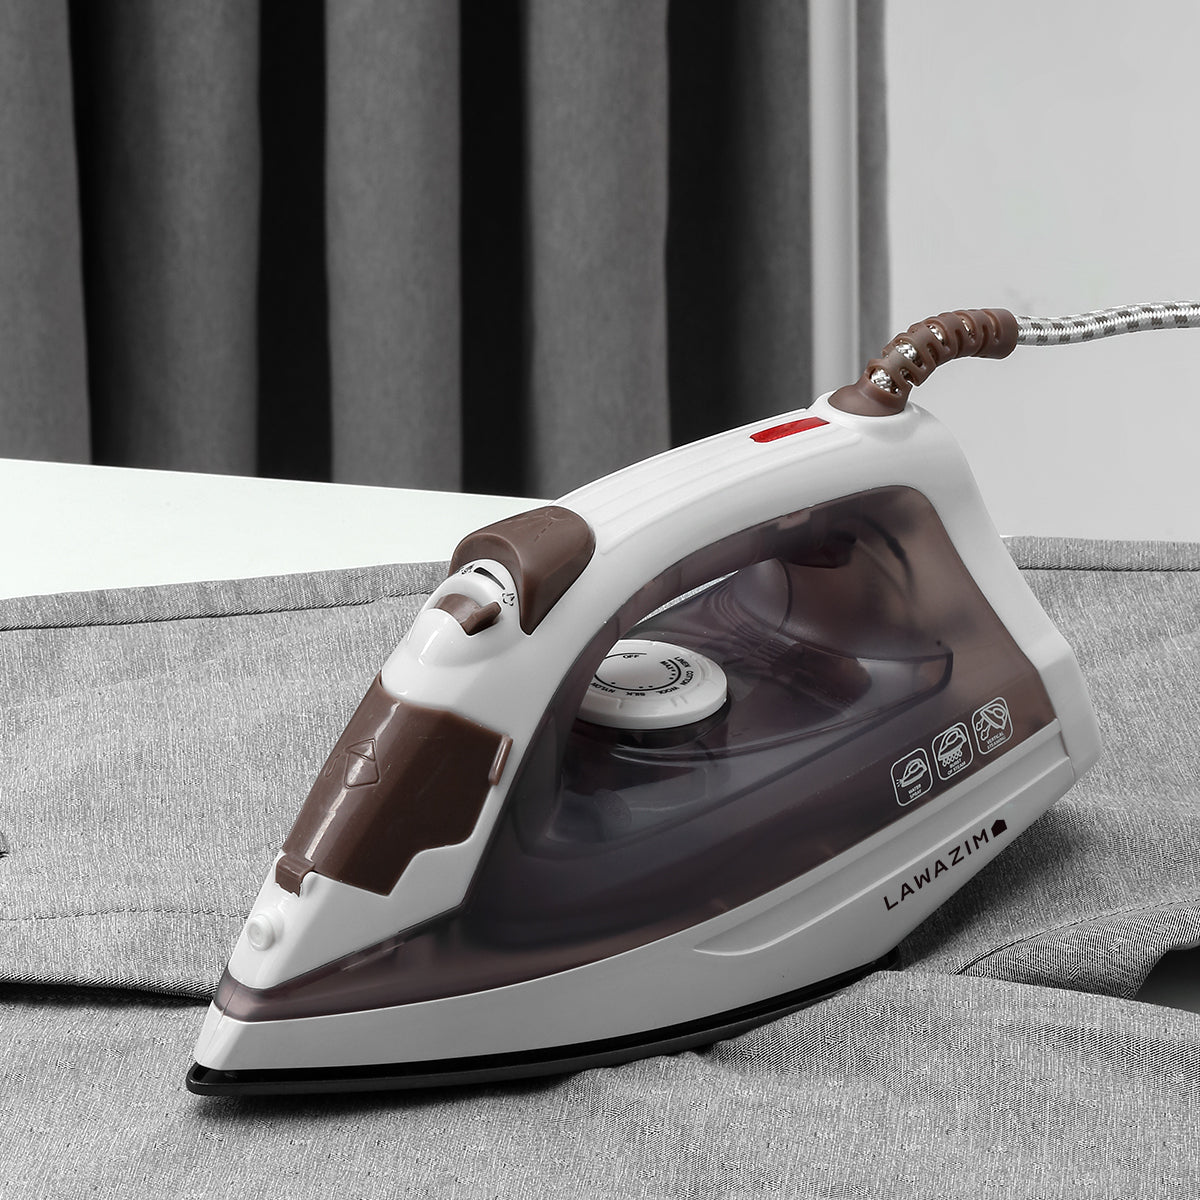 Steam Iron Corded - 1200W - Brown